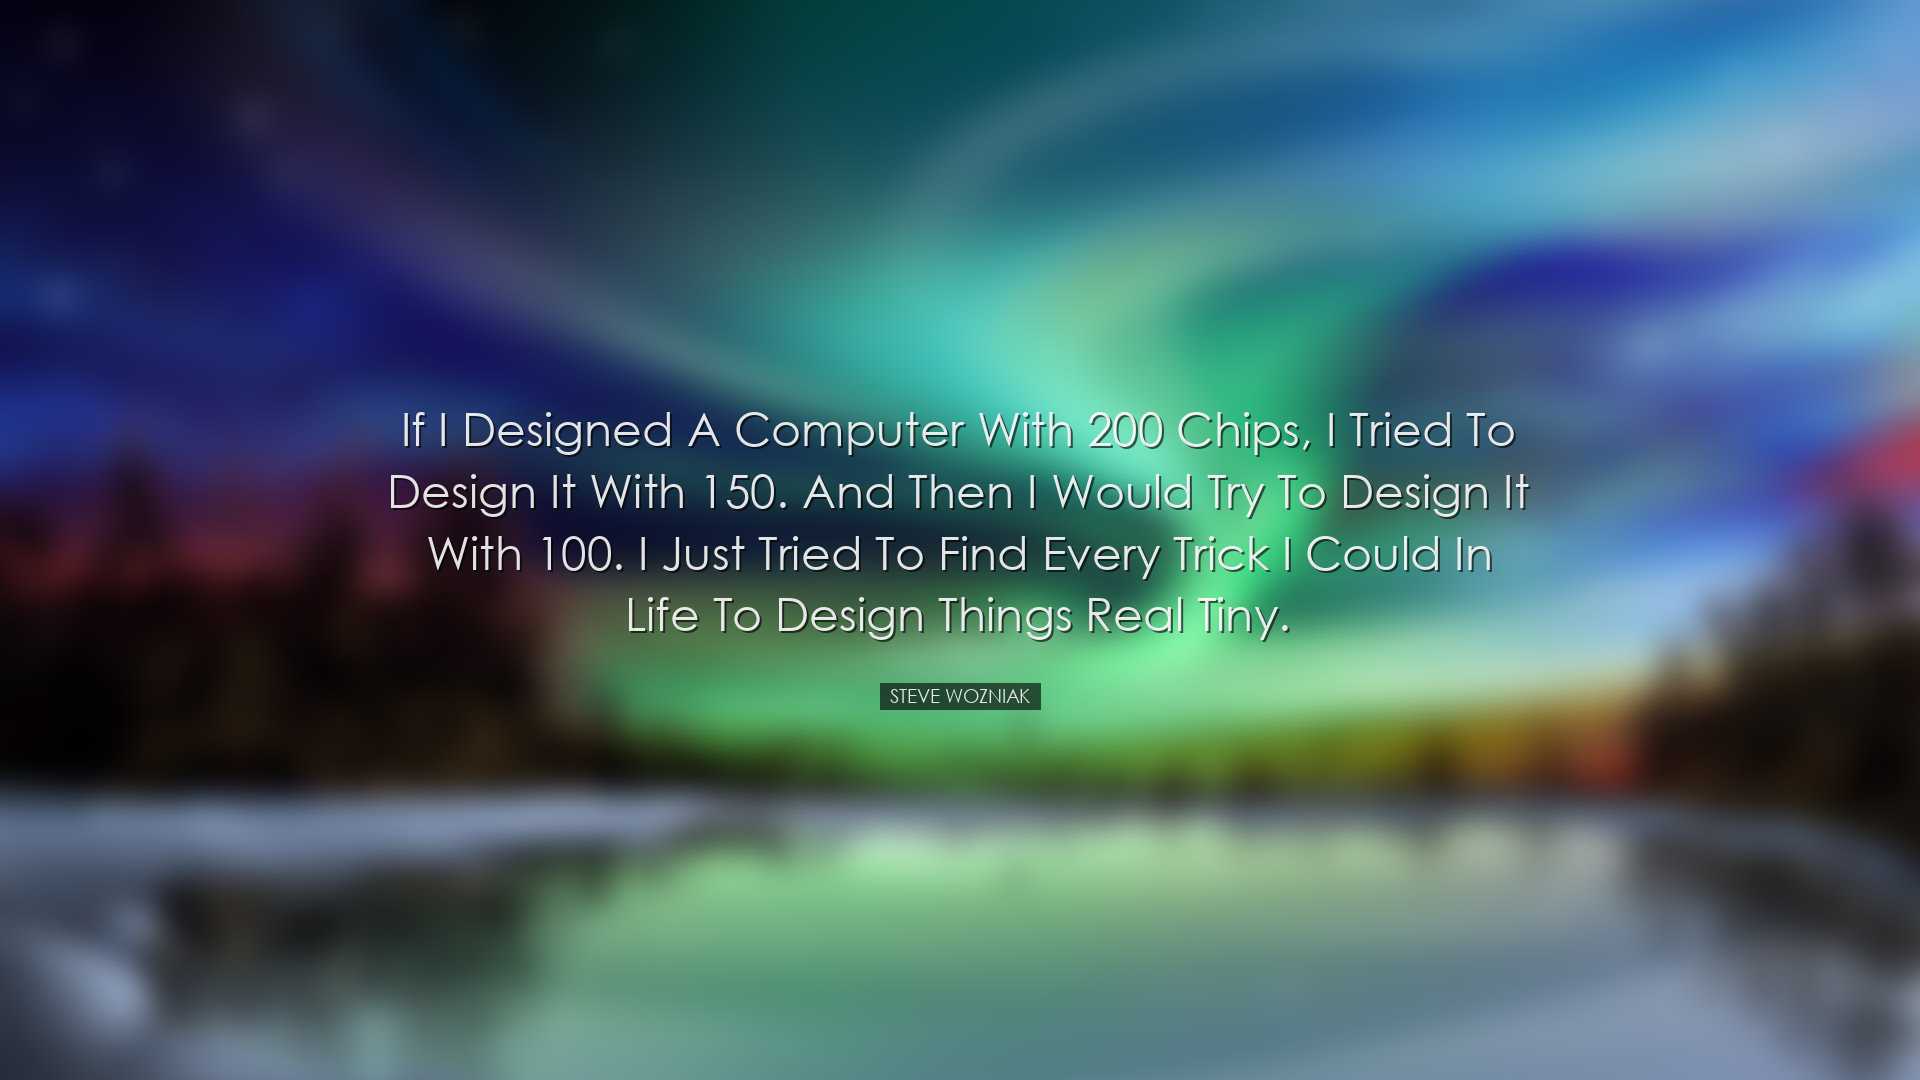 If I designed a computer with 200 chips, I tried to design it with